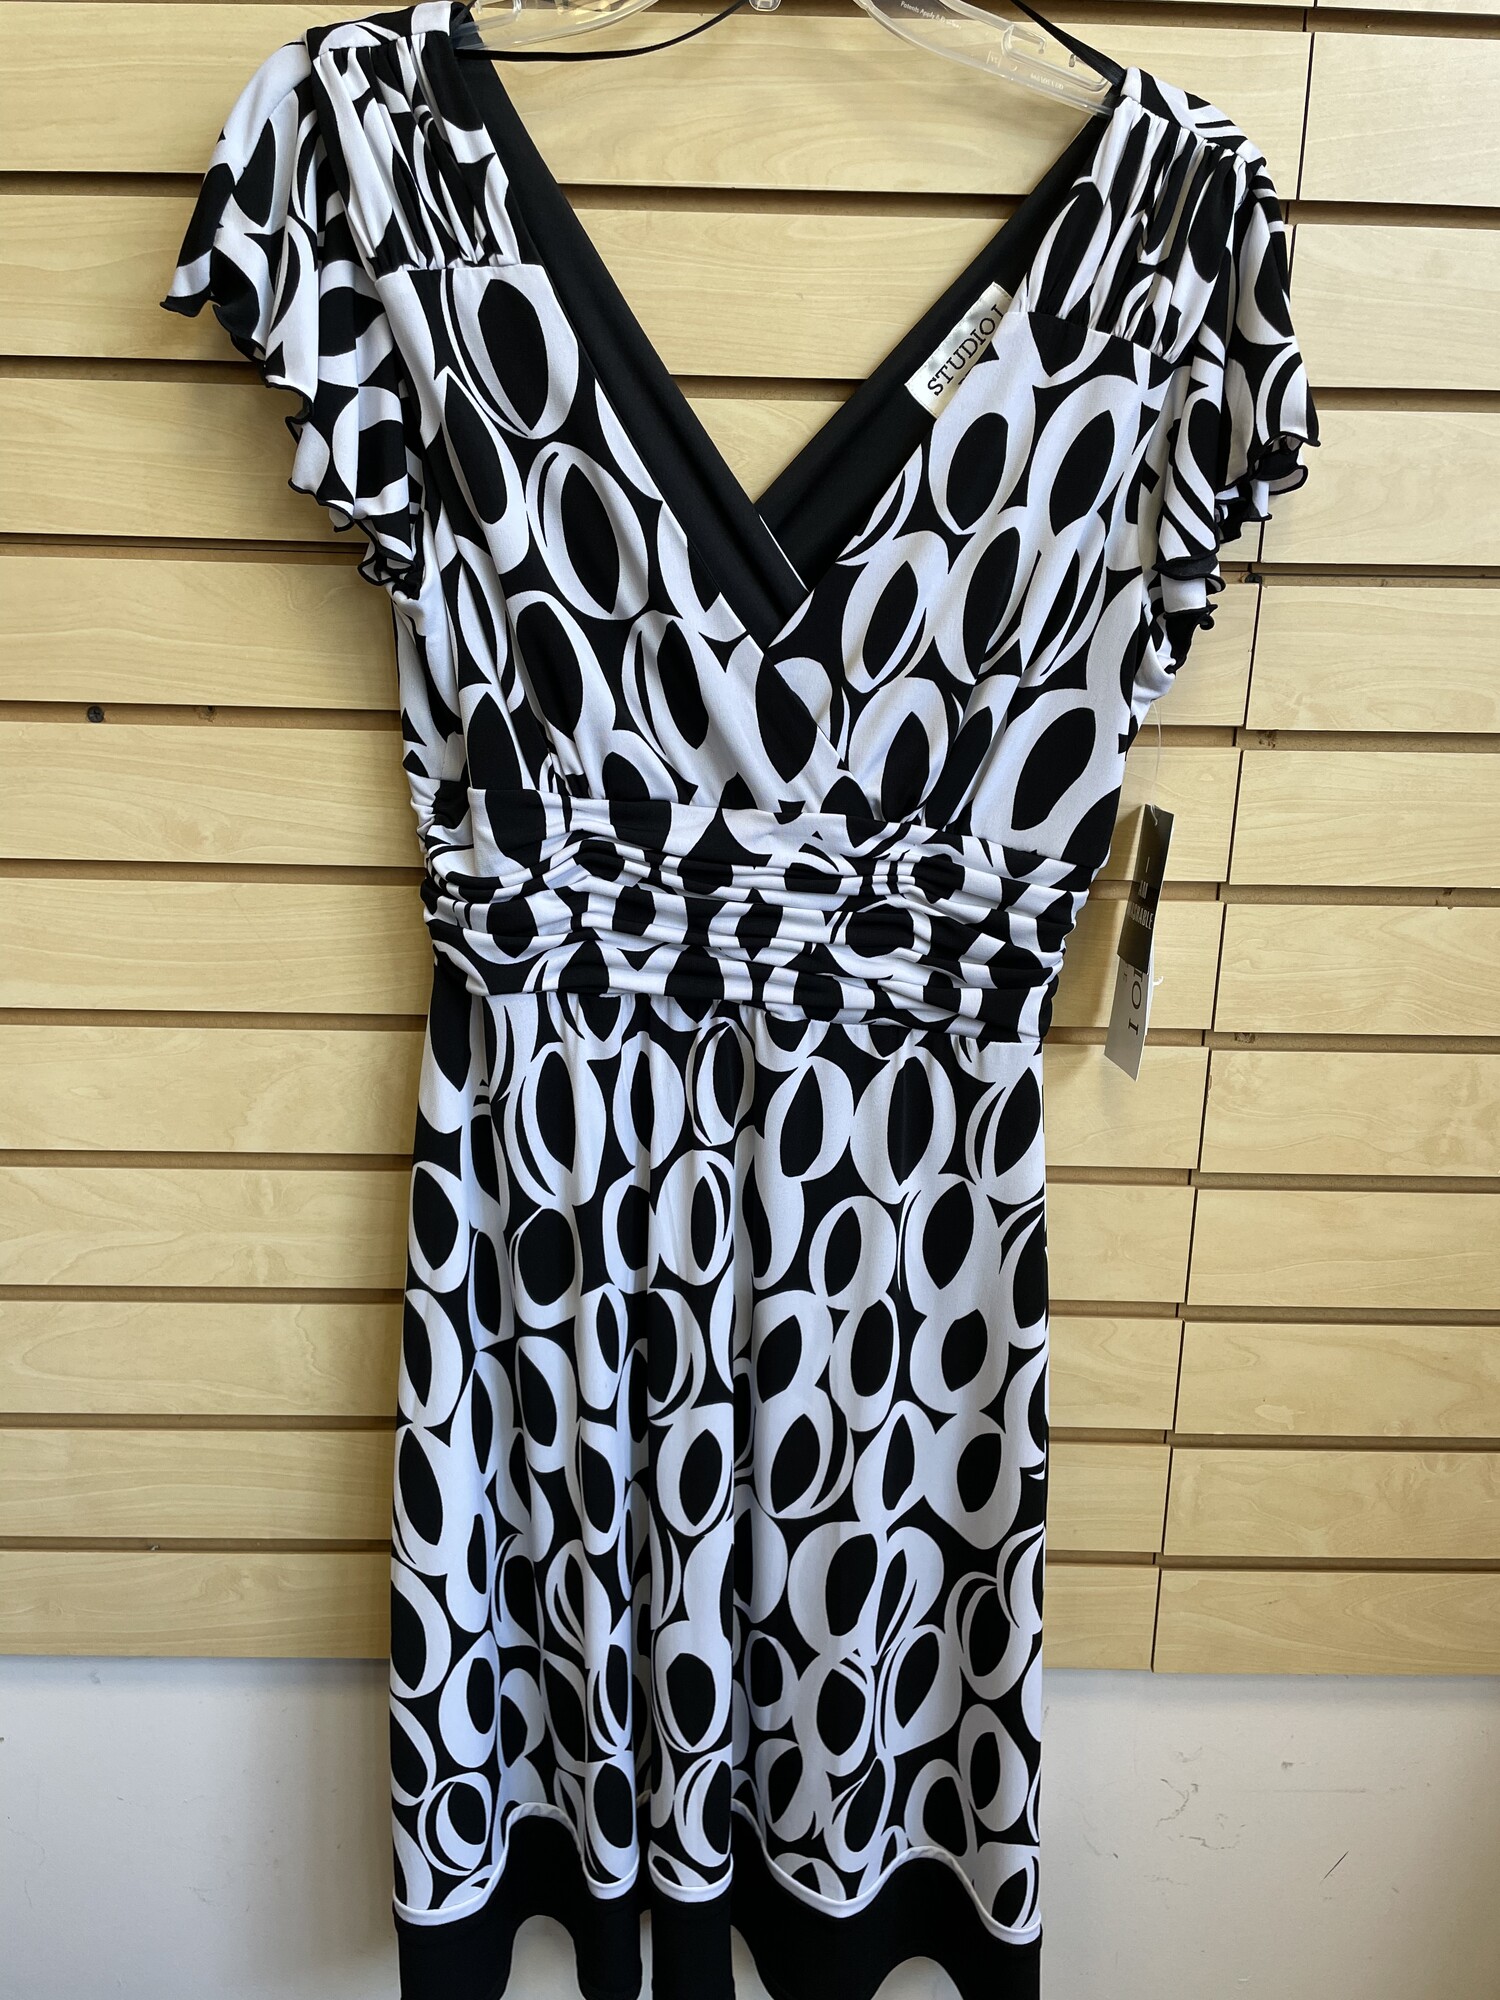 NWT Studio 1 Petite Dress, Knee Length, Cap Sleeves, Black with White Oval Pattern, Surplice Top, Gathered Waist, Strechy Fabric, Size: Large Petite